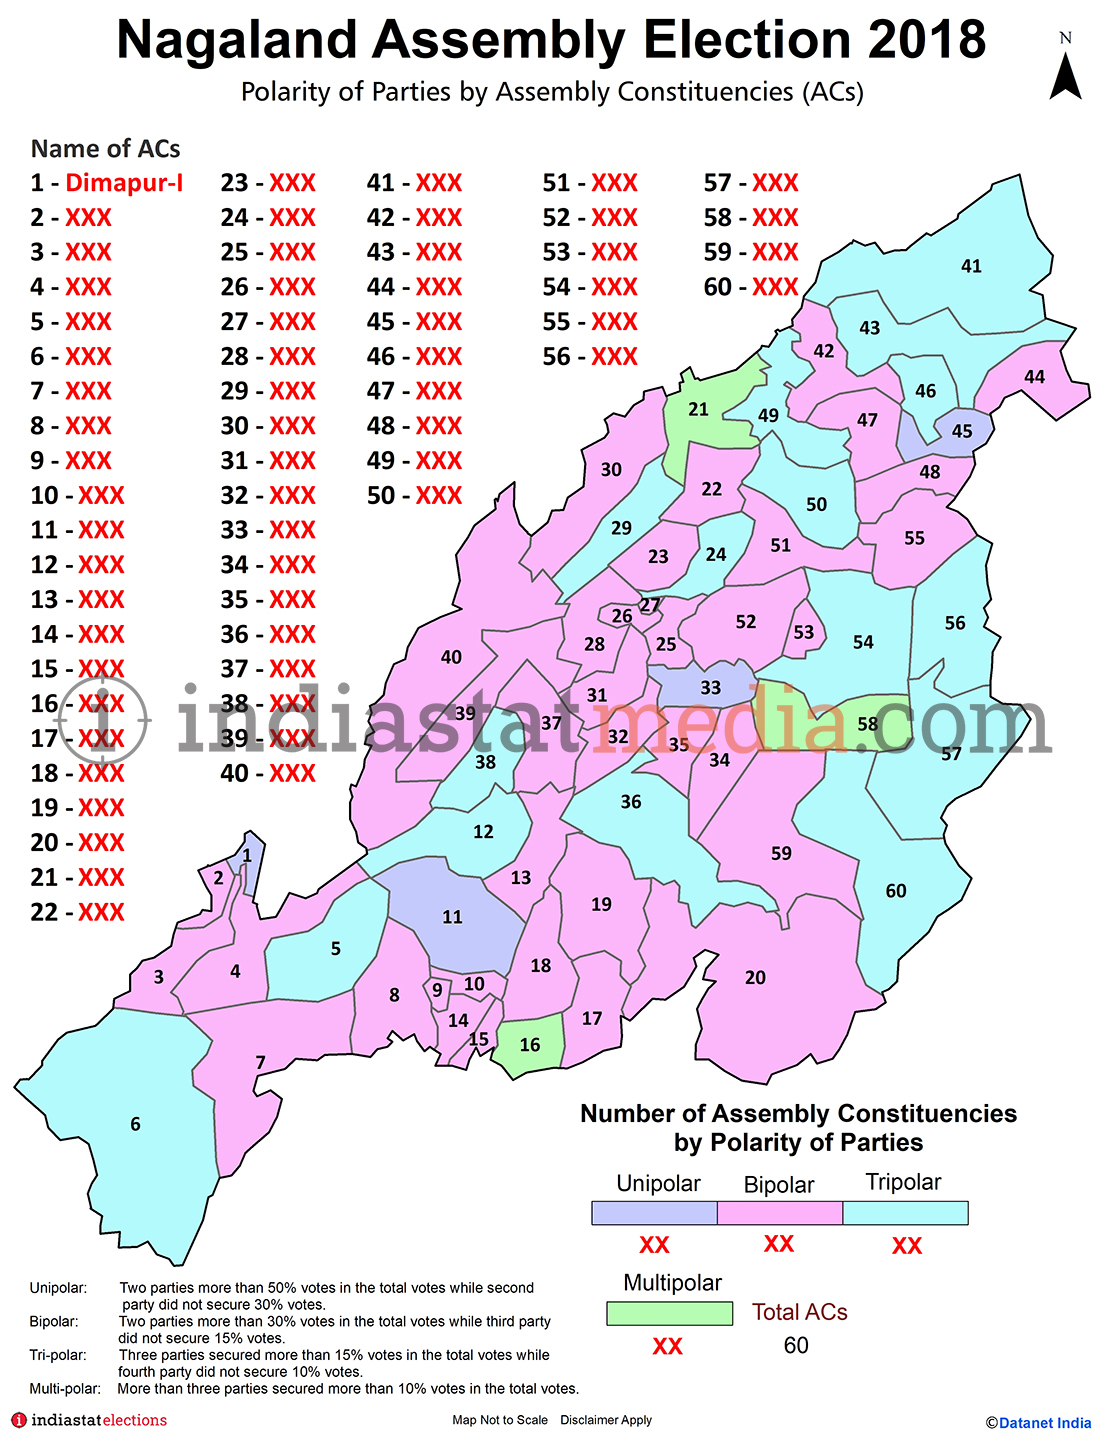 Polarity of Parties by Assembly Constituencies in Nagaland (Assembly Election - 2018)